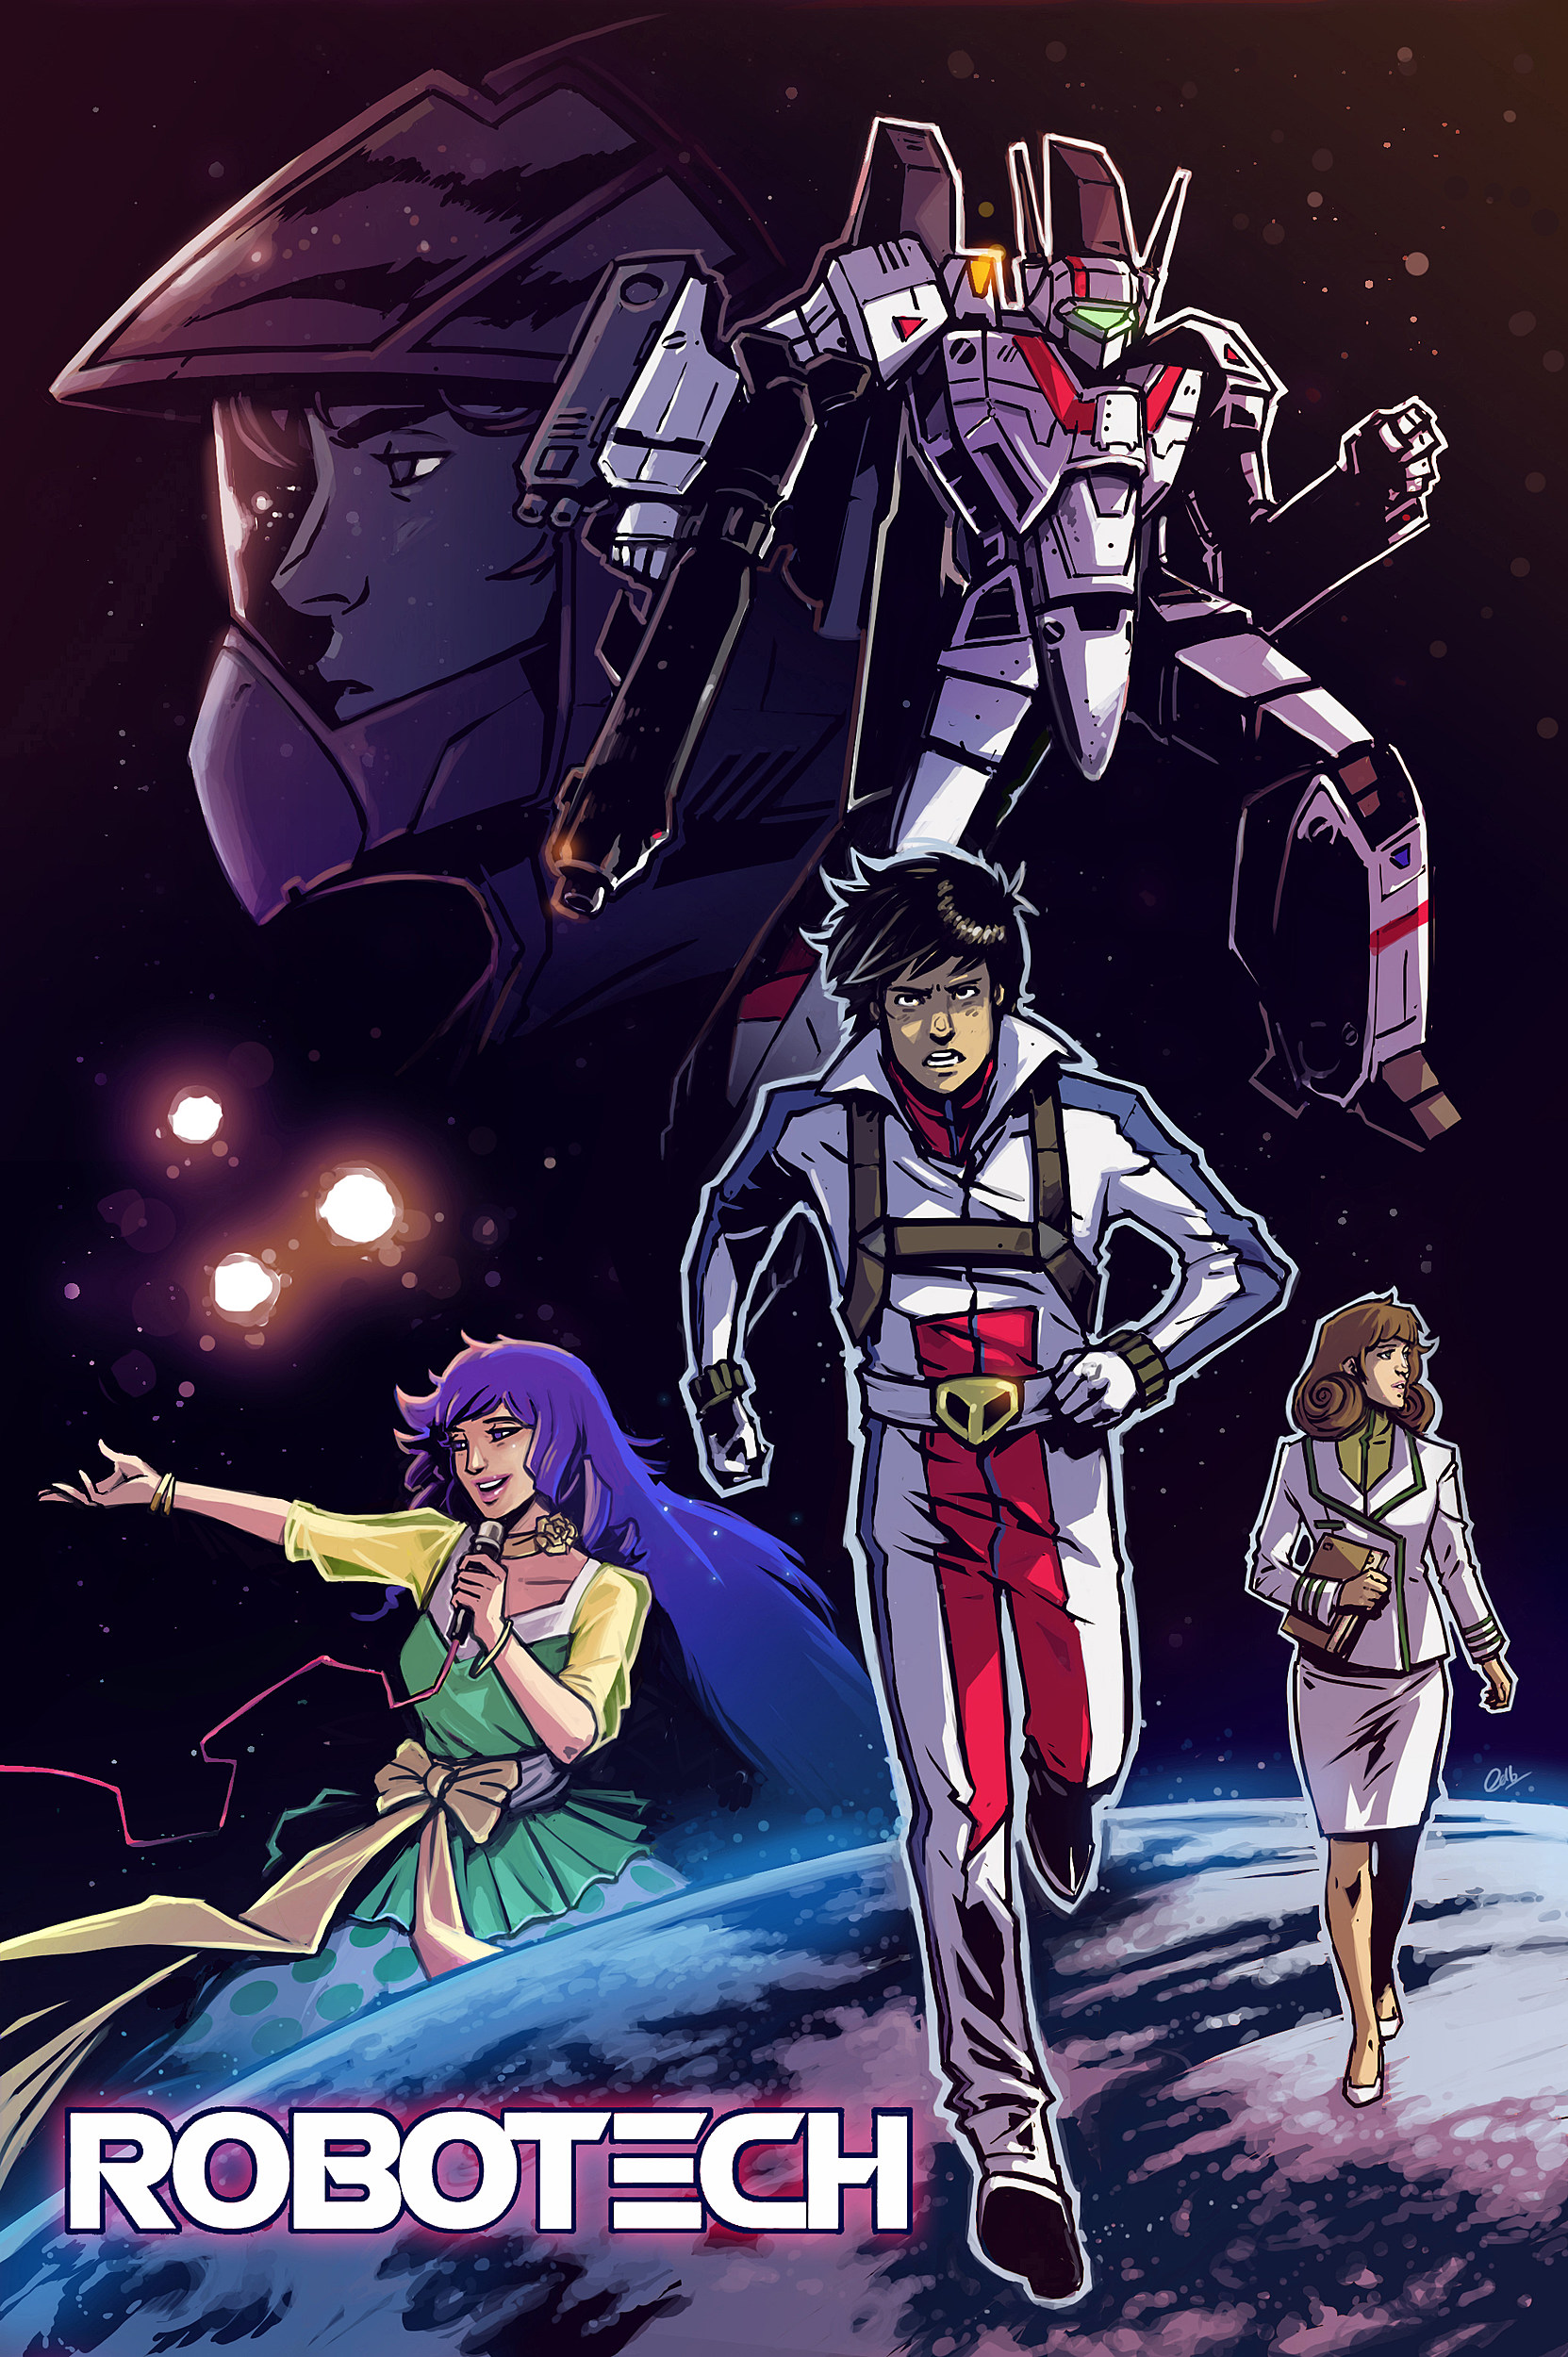 Robotech Remastered Extended Editions,The Masters,Anime 07 DVD | eBay